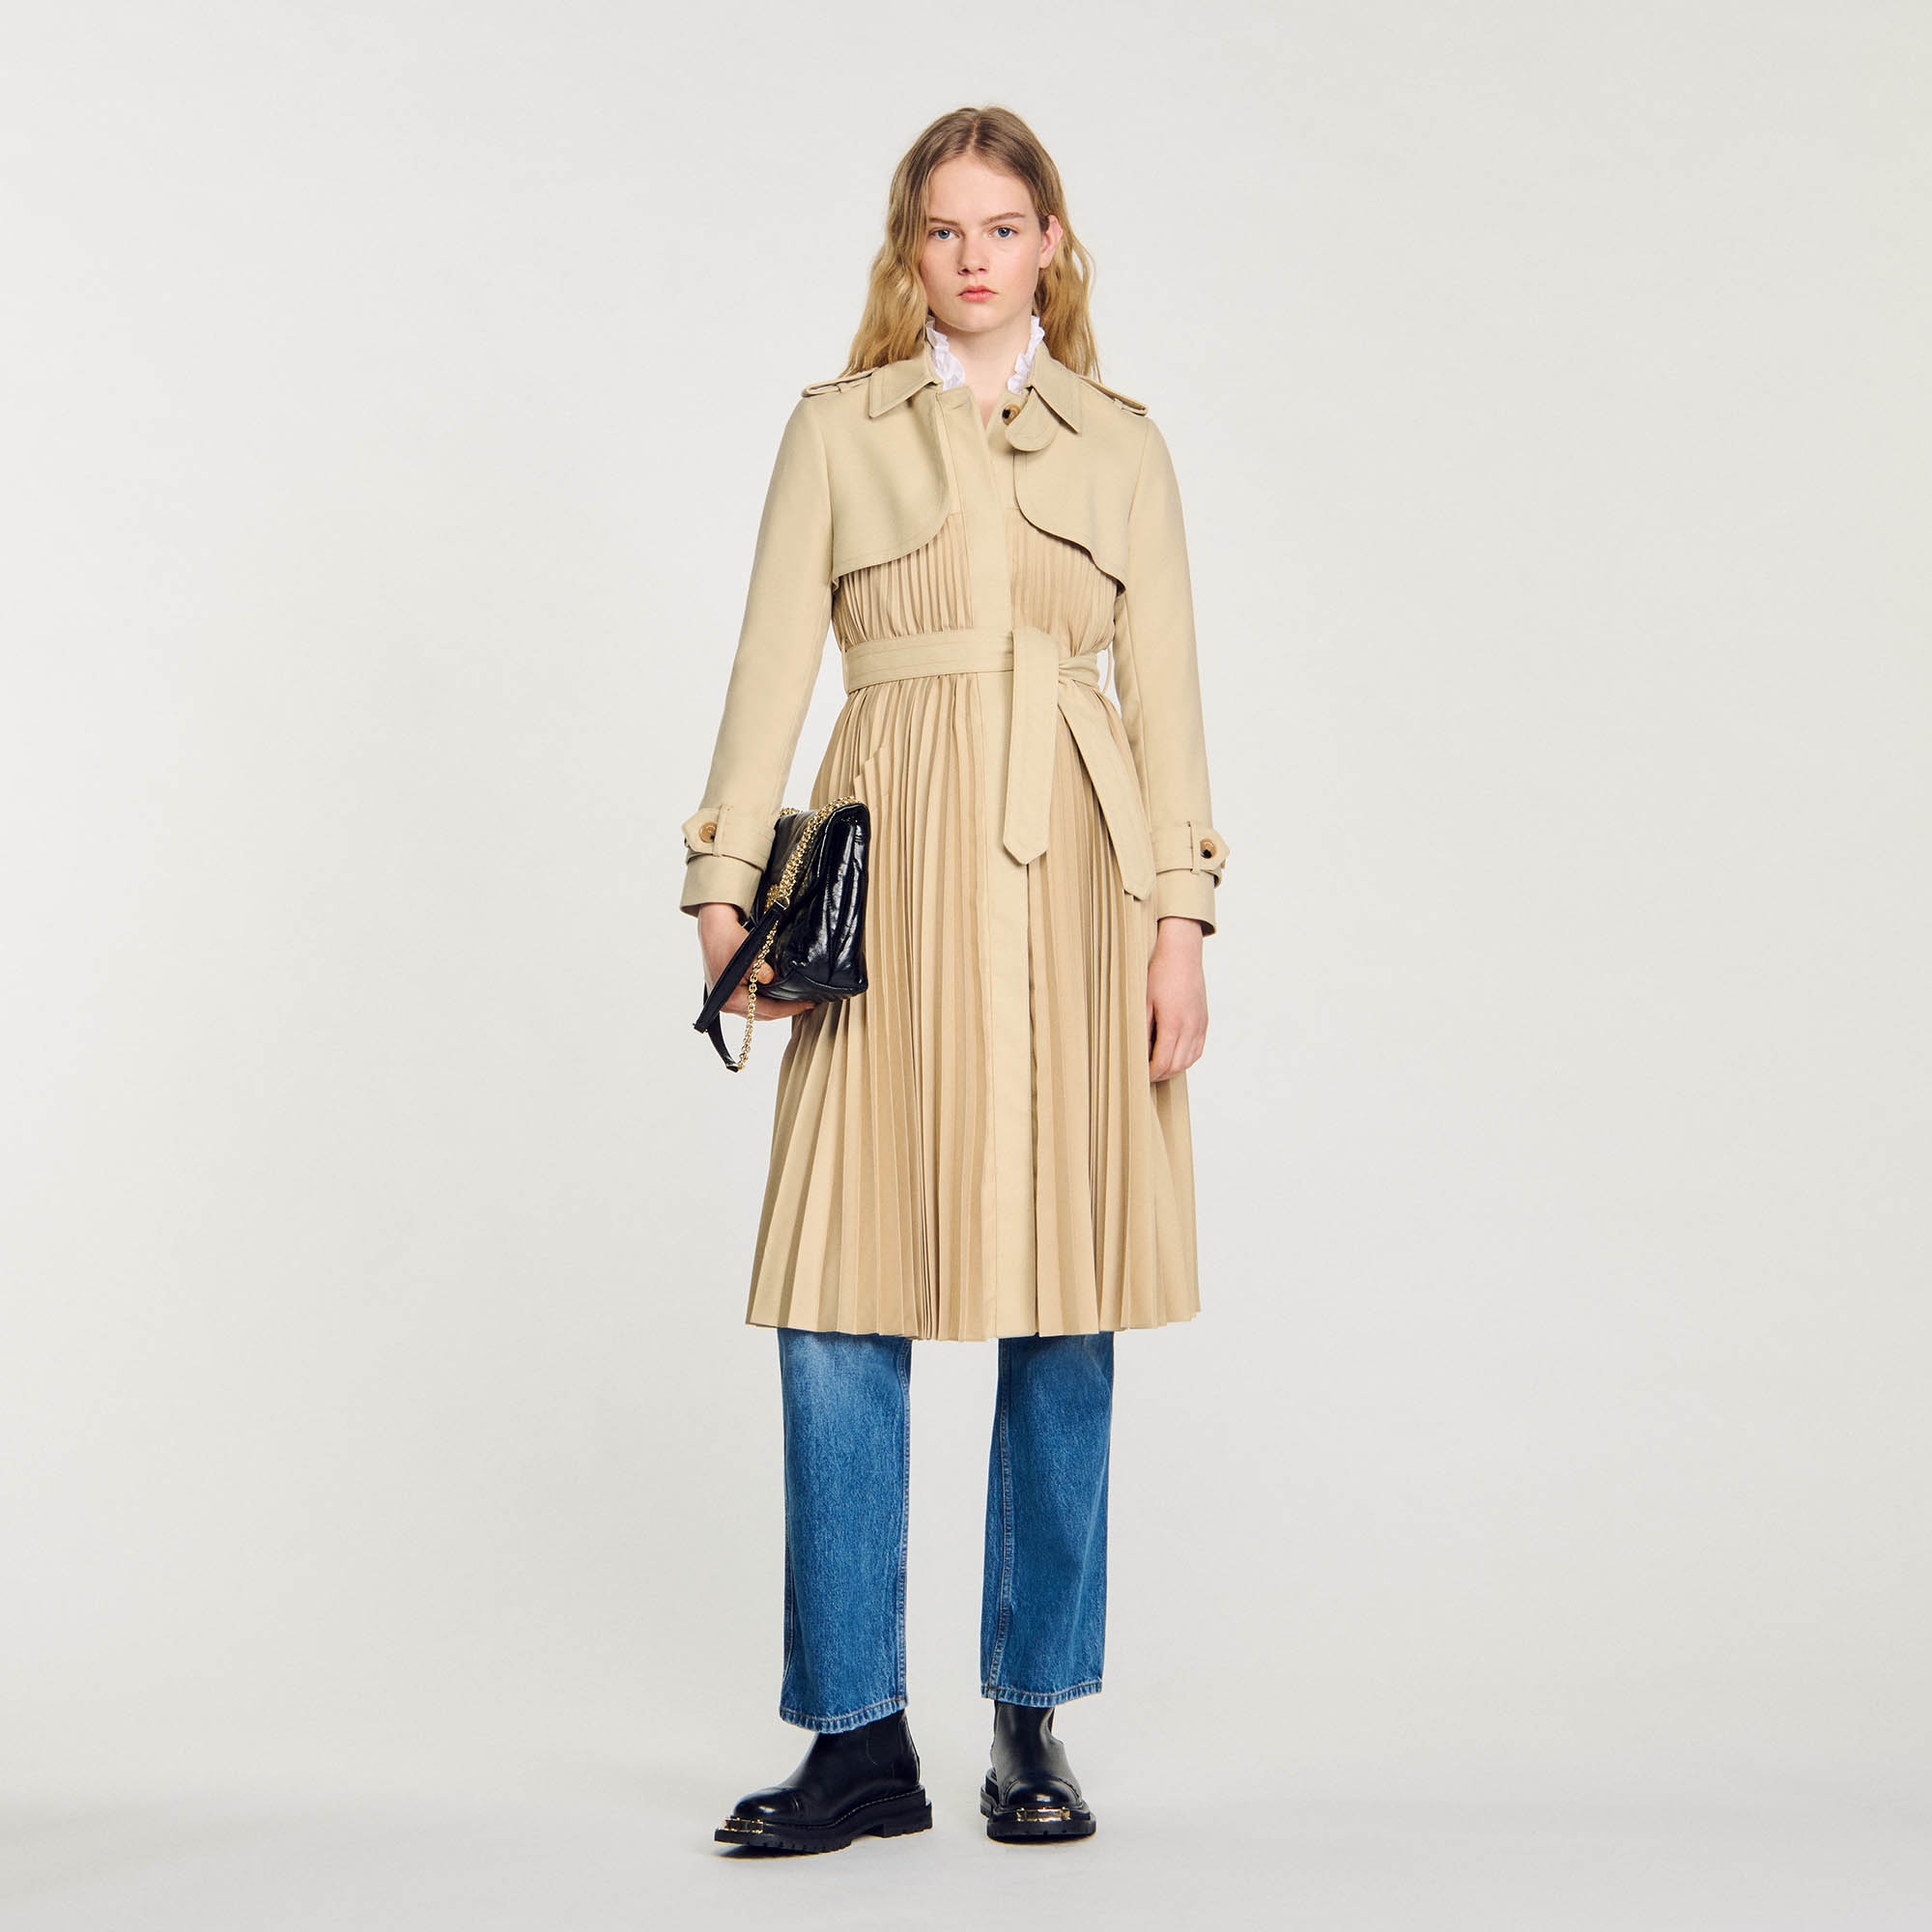 Sandro polyester Lining: Sandro women's trench coat â€¢ Pleated trench coat with belt Pockets at the front Tabs on the cuffs and shoulders â€¢ Storm flap â€¢ Eco-friendly buttons in organic resin The model is 5'10 tall and wears a size 36 FR / 4 US